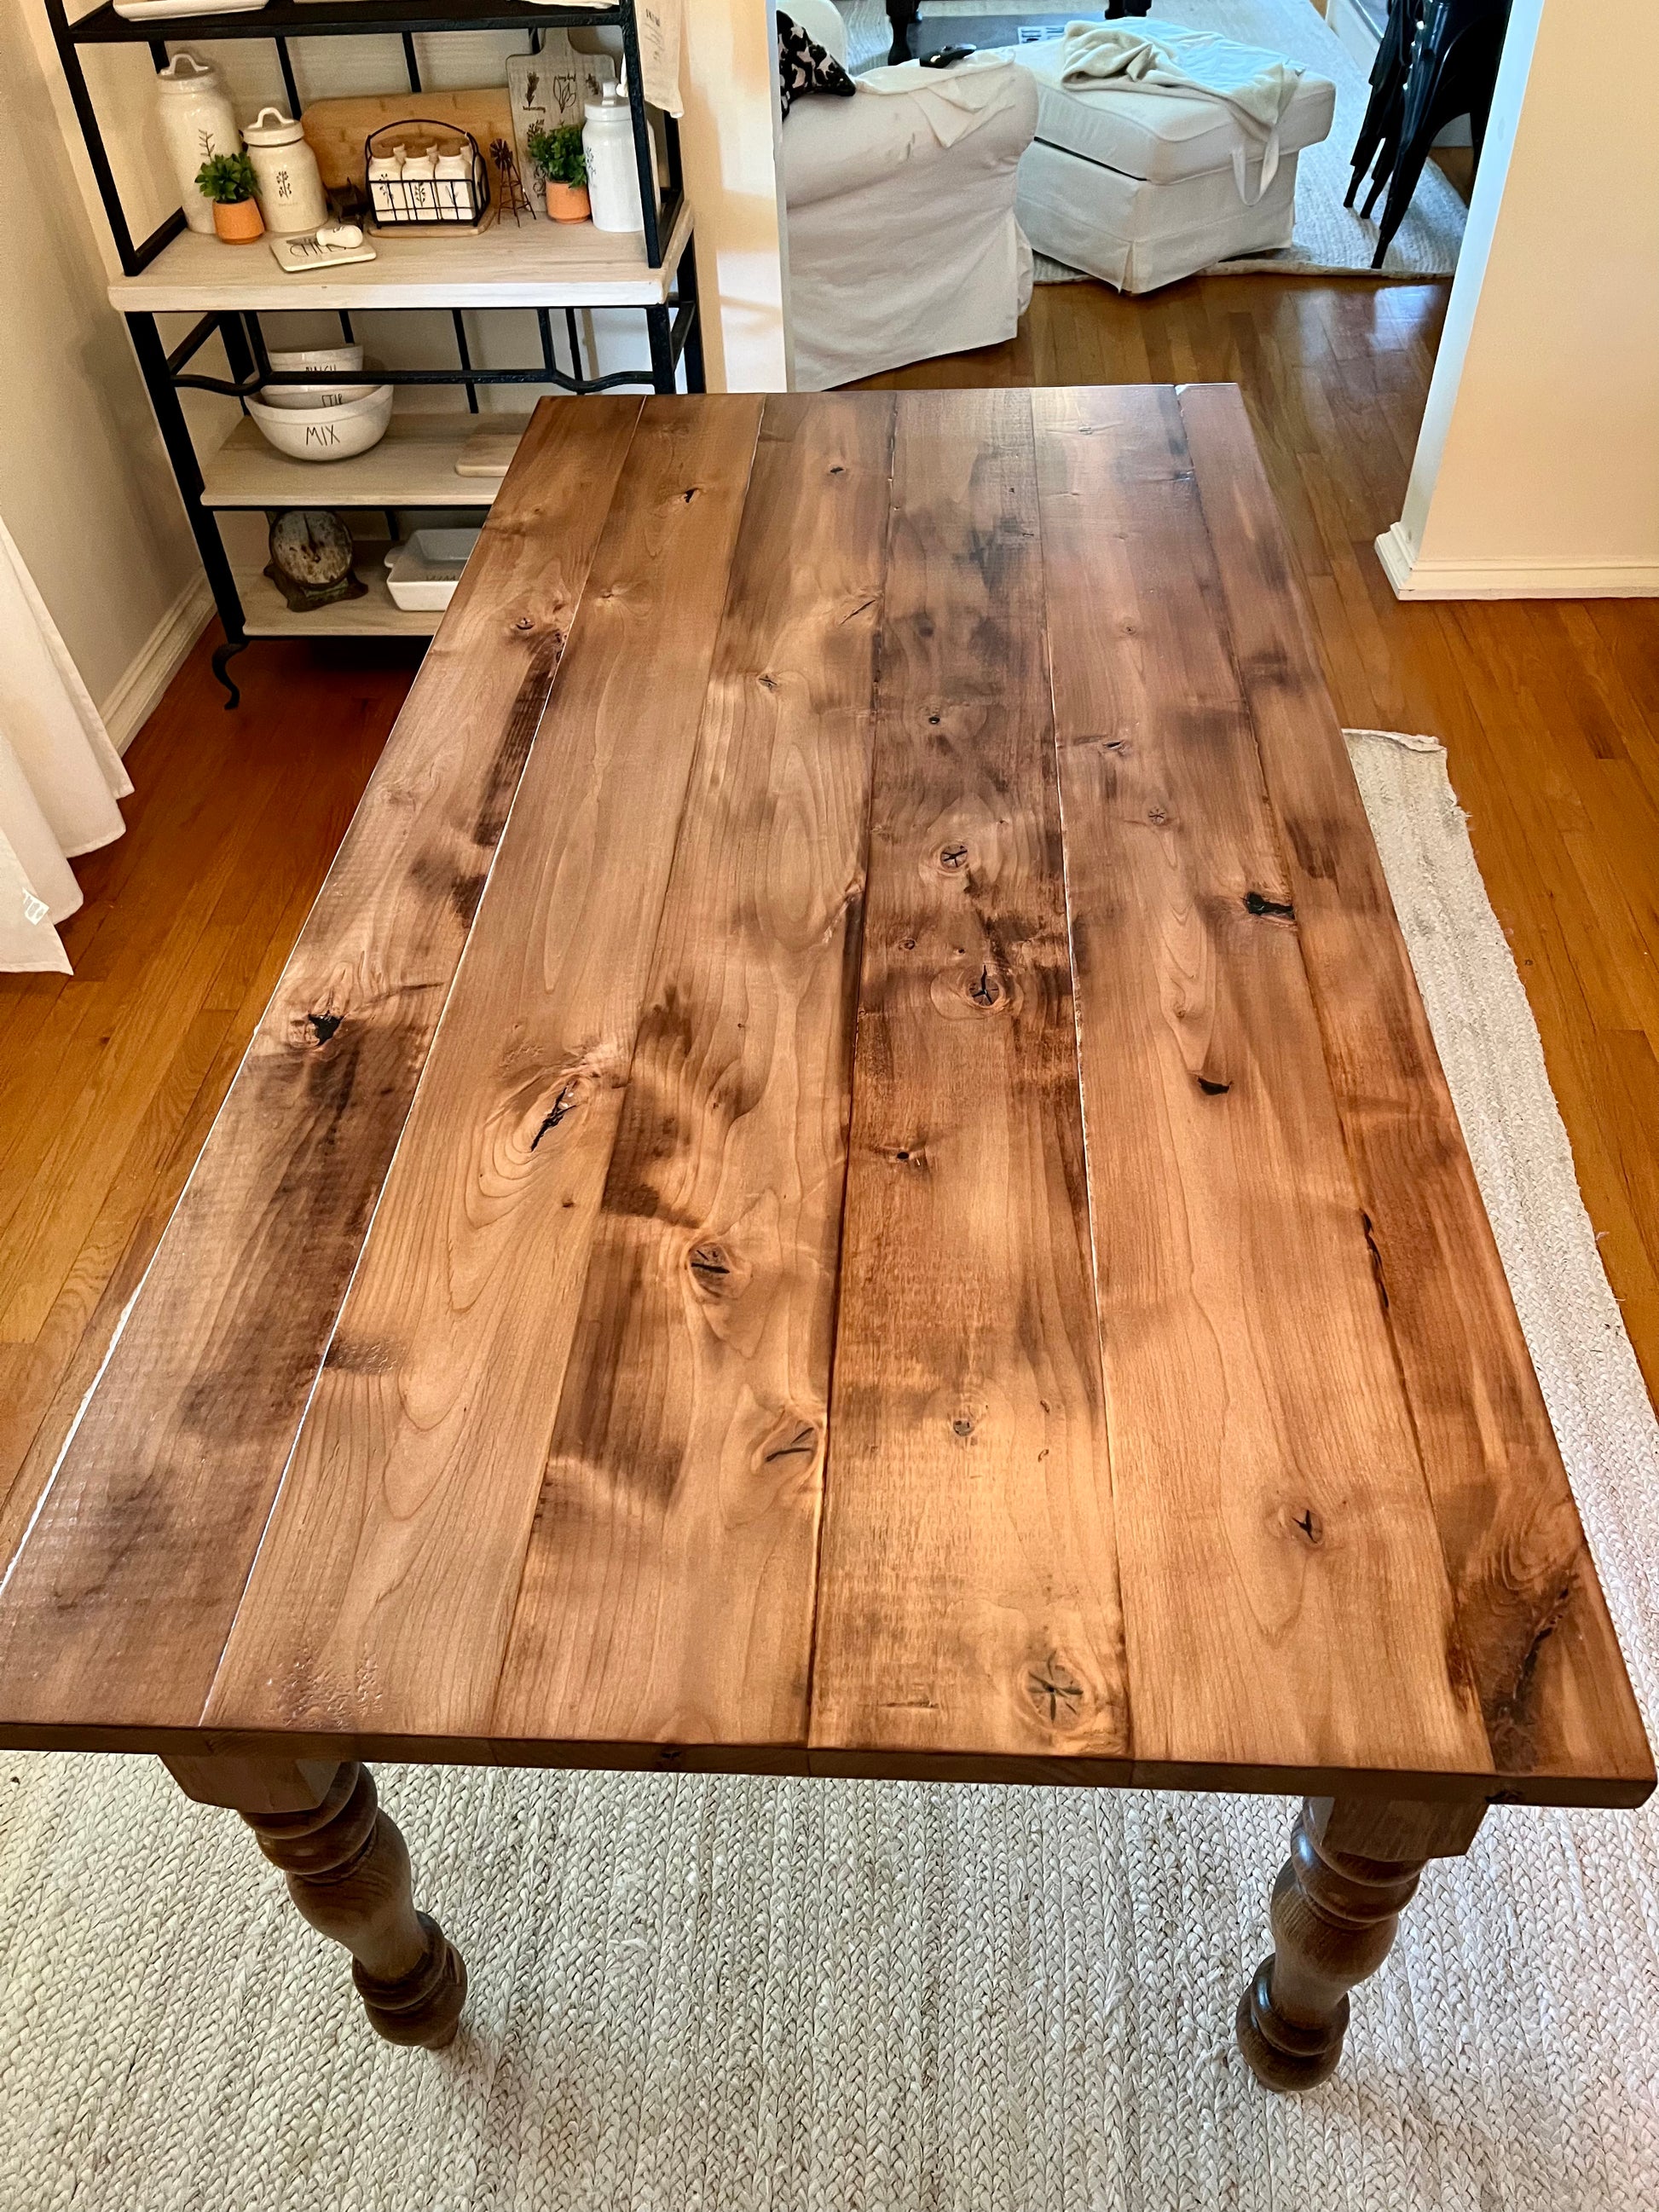 Pictured with a 6' L x 36" W Rustic Farm Table stained Early American.